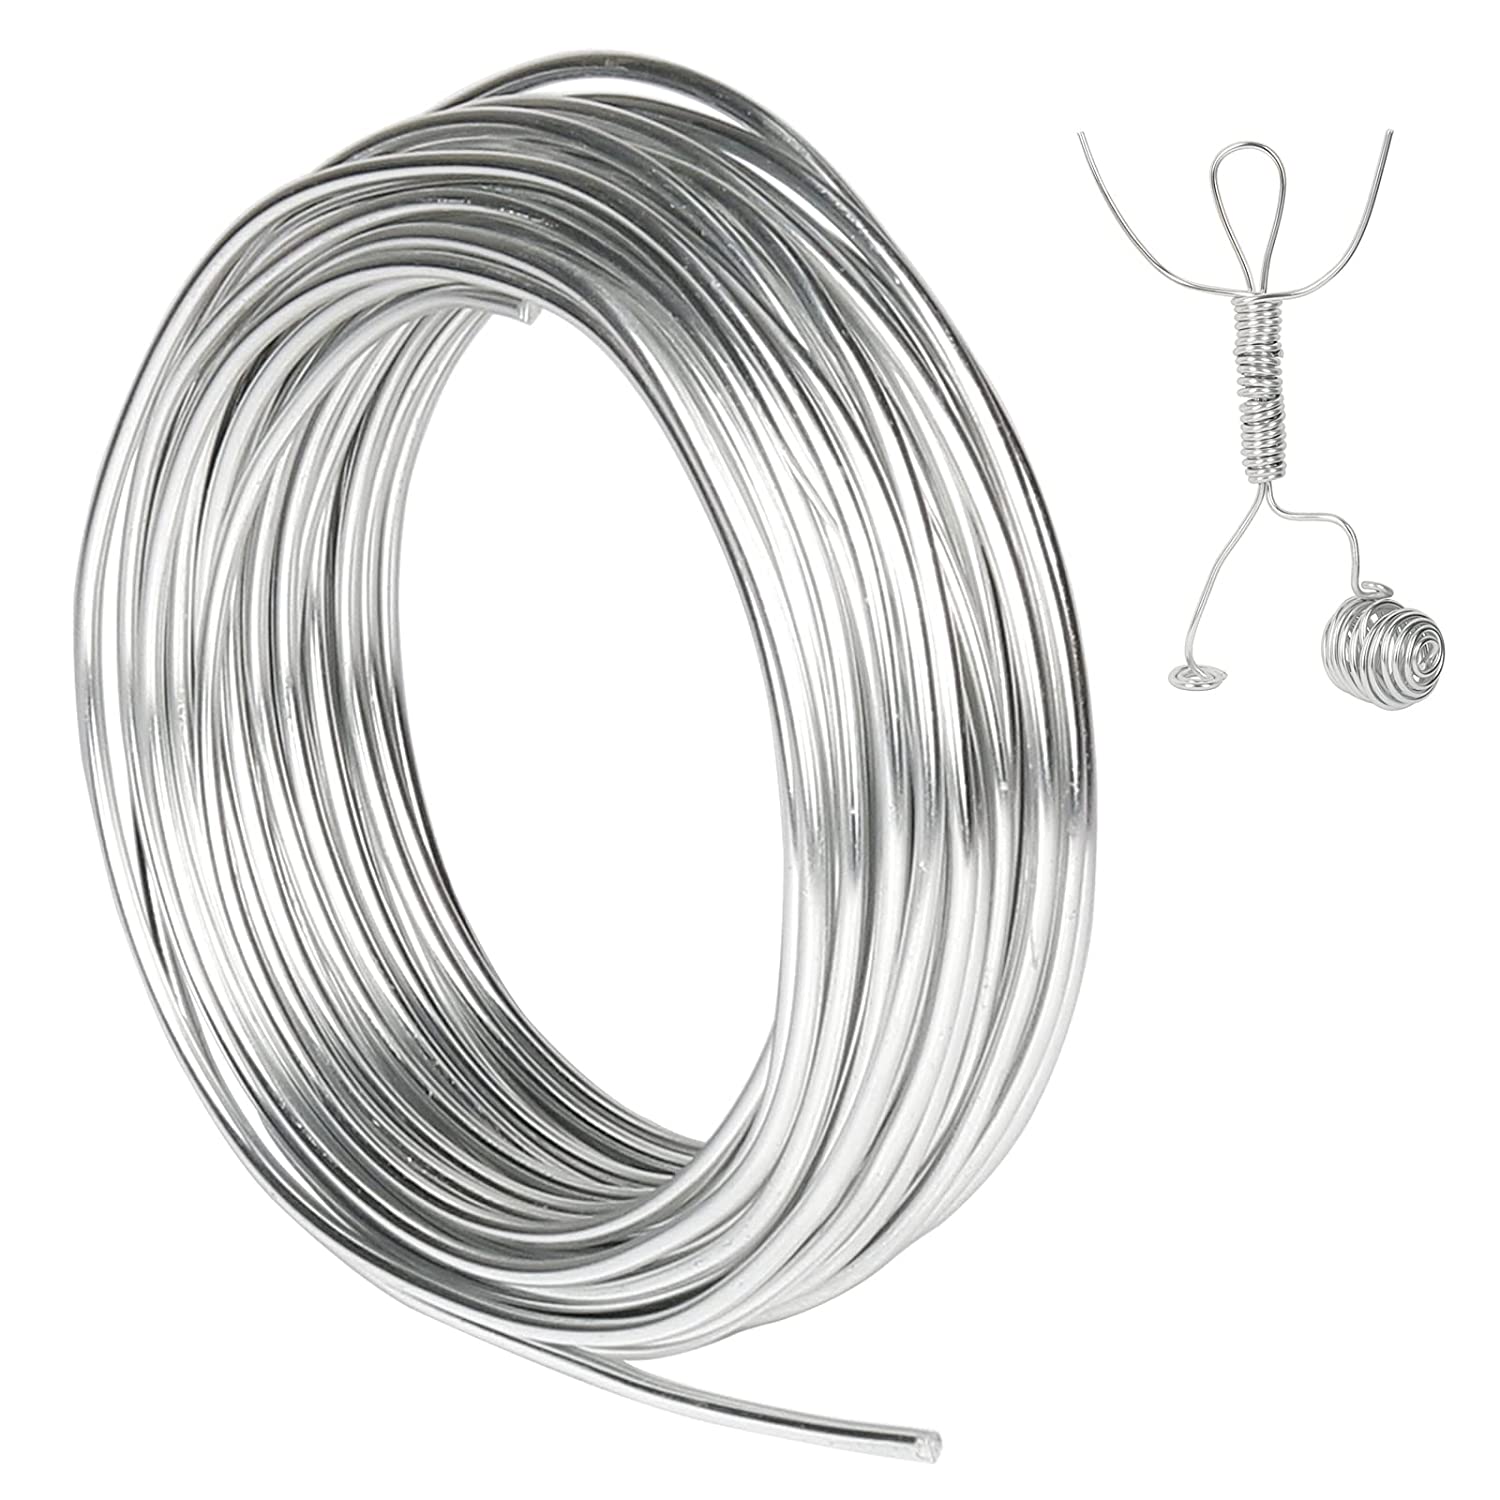 TecUnite 65.6 Feet Silver Aluminum Craft Wire, Soft and Flexible Metal Armature Wire for DIY Manual Arts and Crafts (1.5 mm)